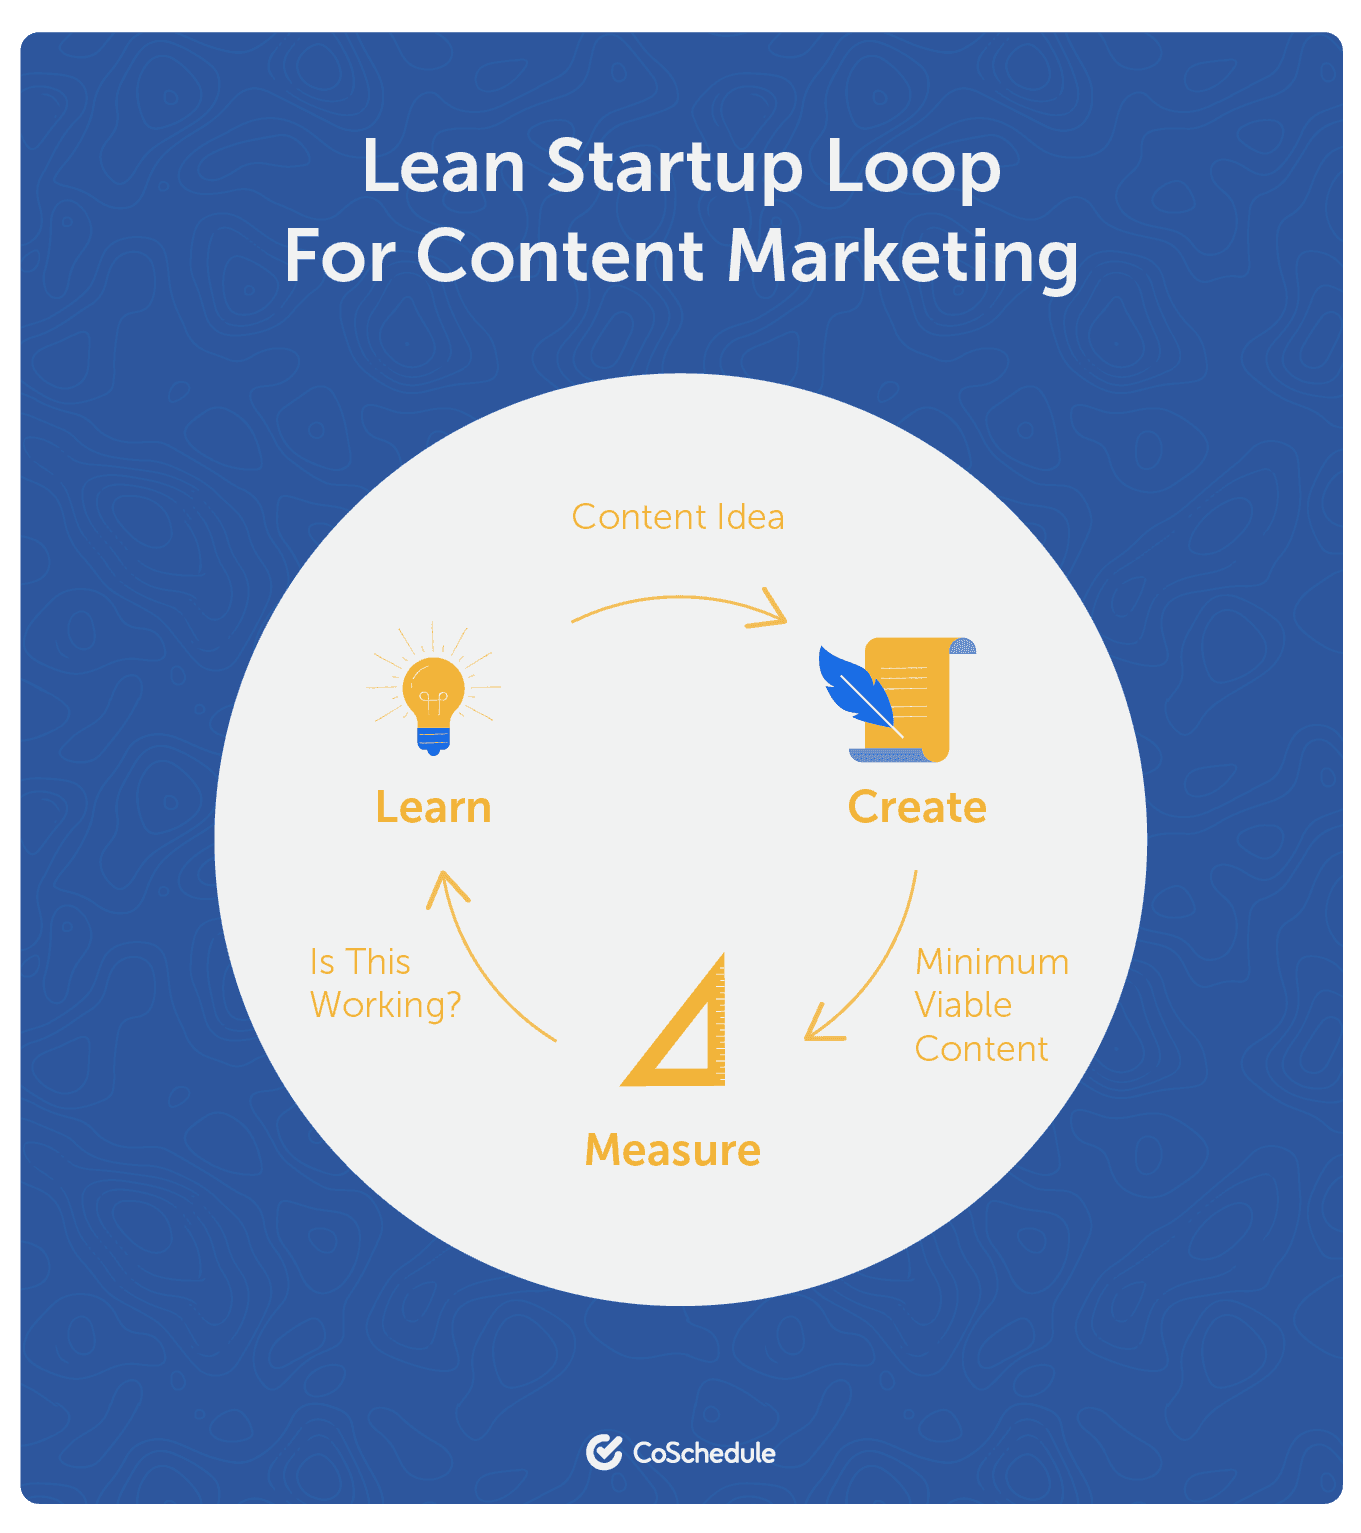 CoSchedule startup loop for content marketing graphic